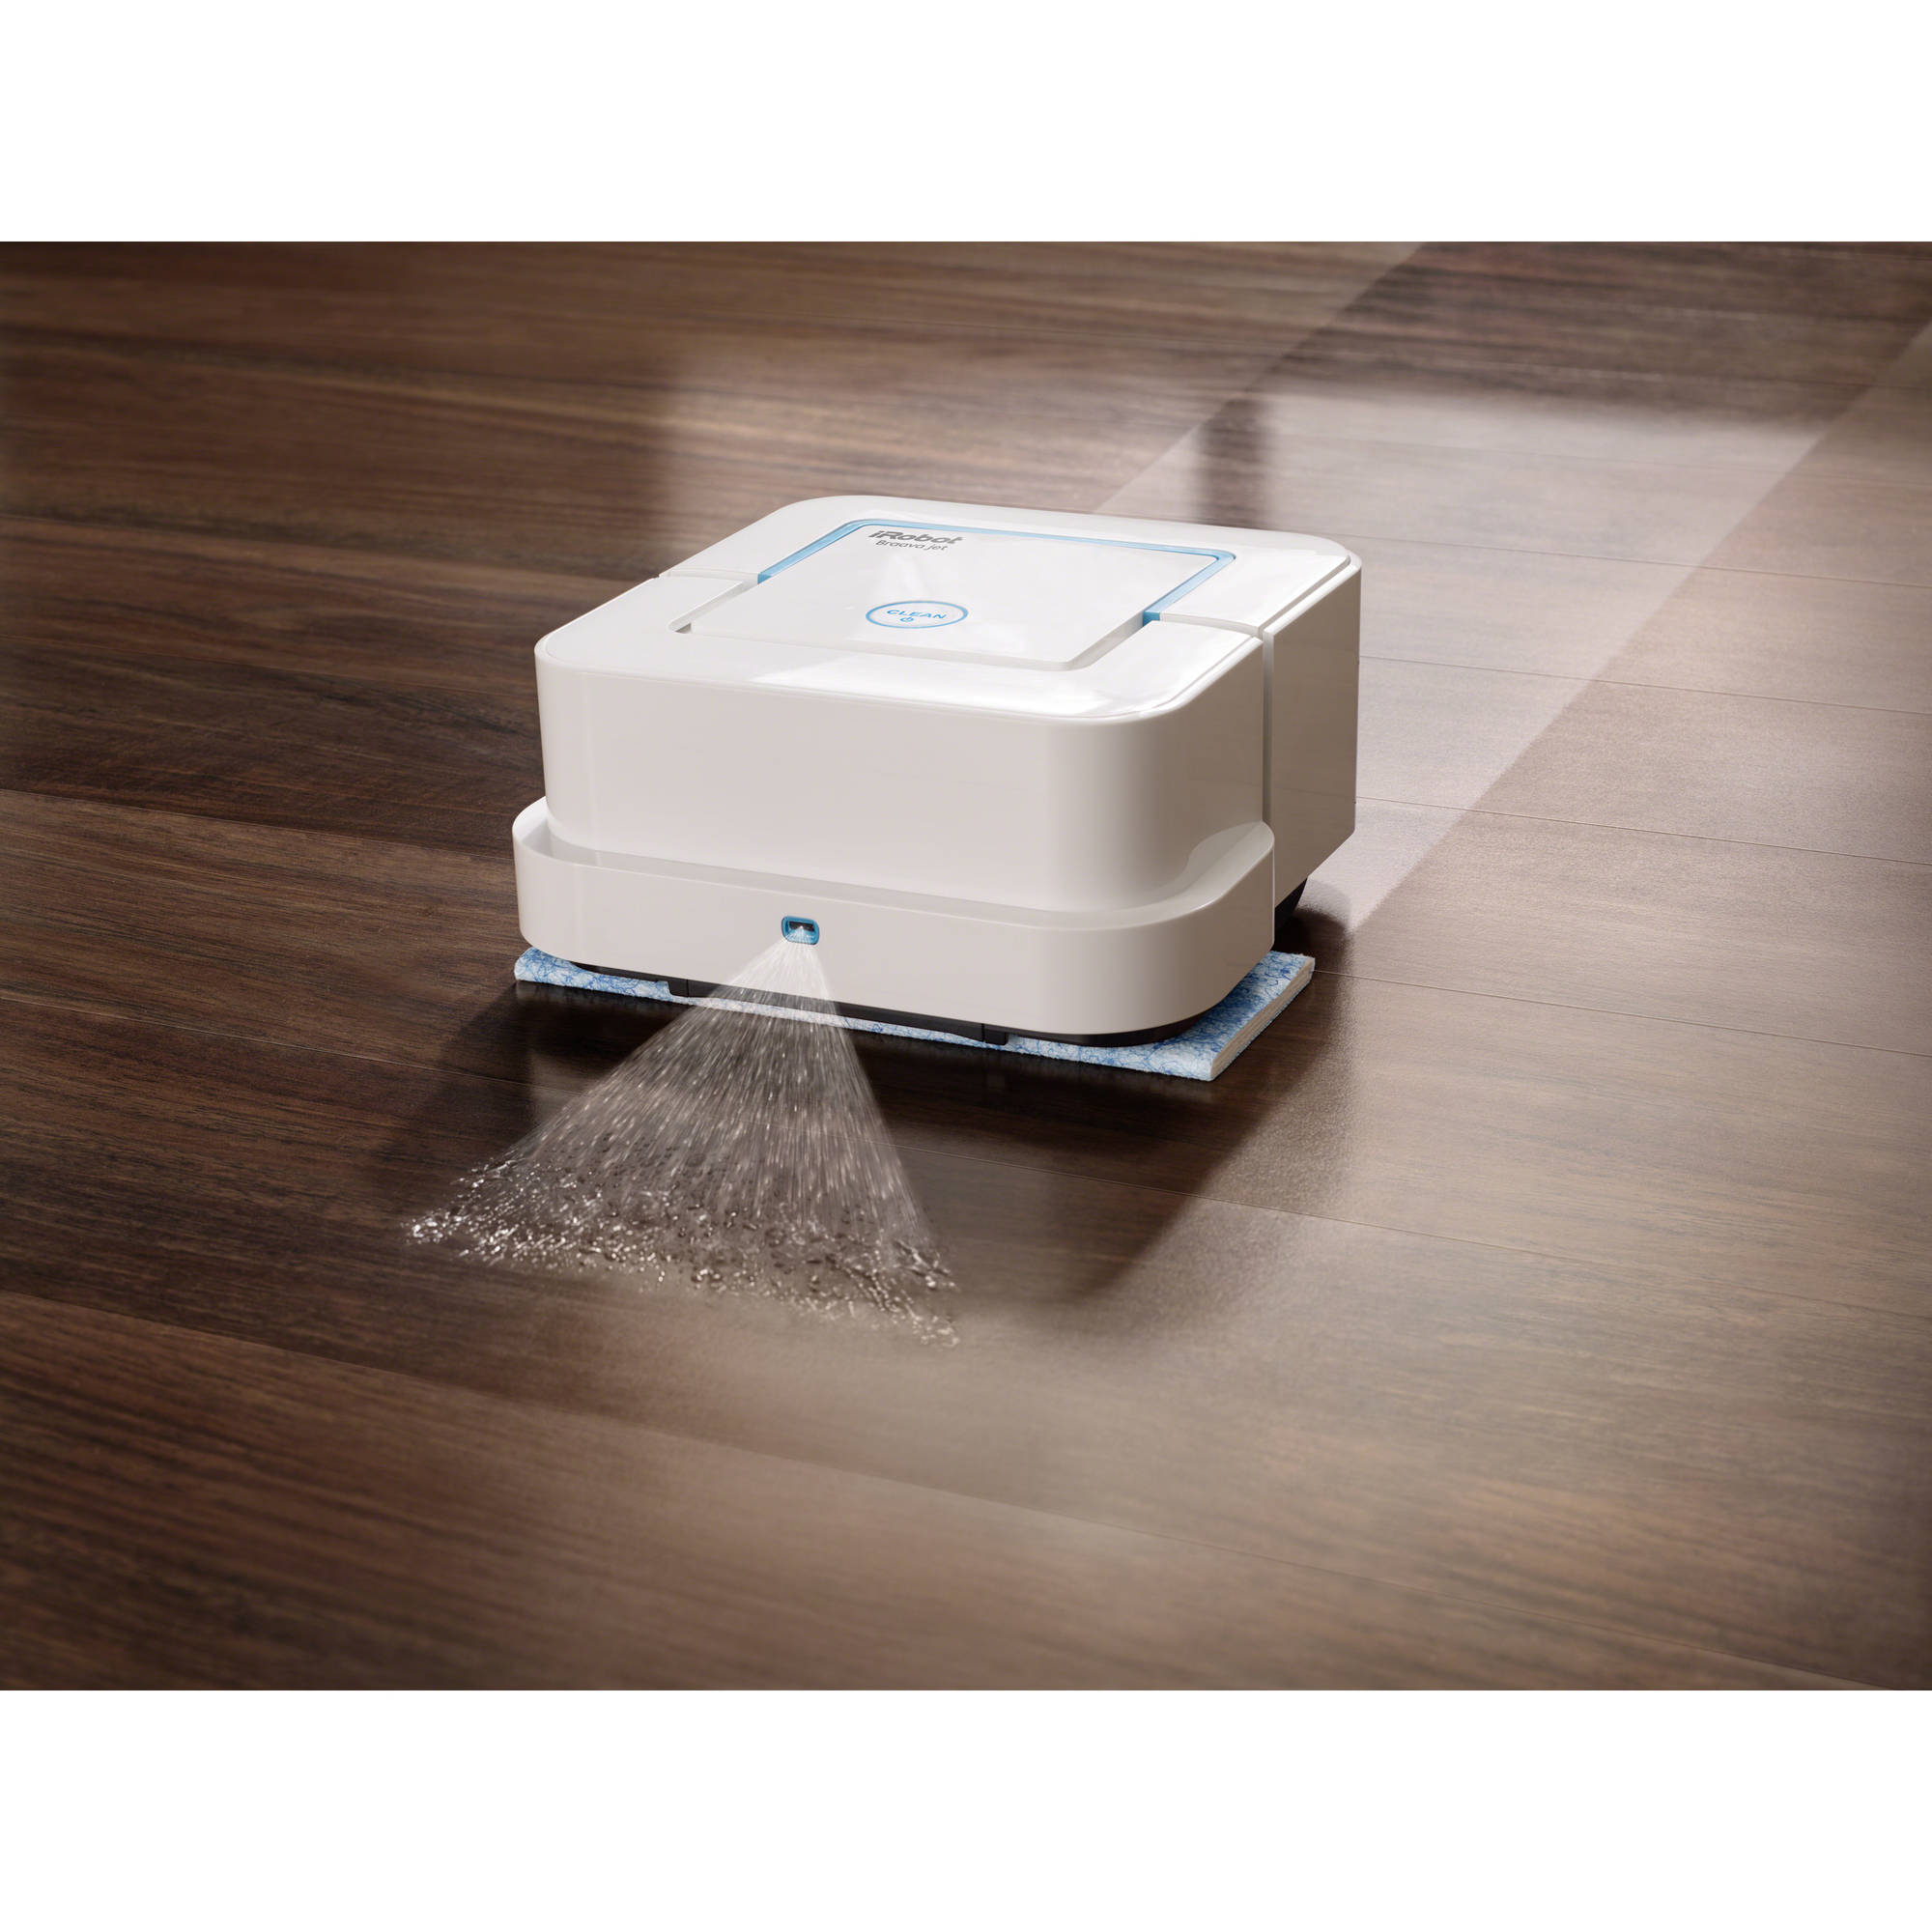 iRobot Braava jet 245 Superior Robot Mop - App enabled, Precision Jet Spray, vibrating cleaning head, wet and damp mopping, dry sweeping modes - image 3 of 7